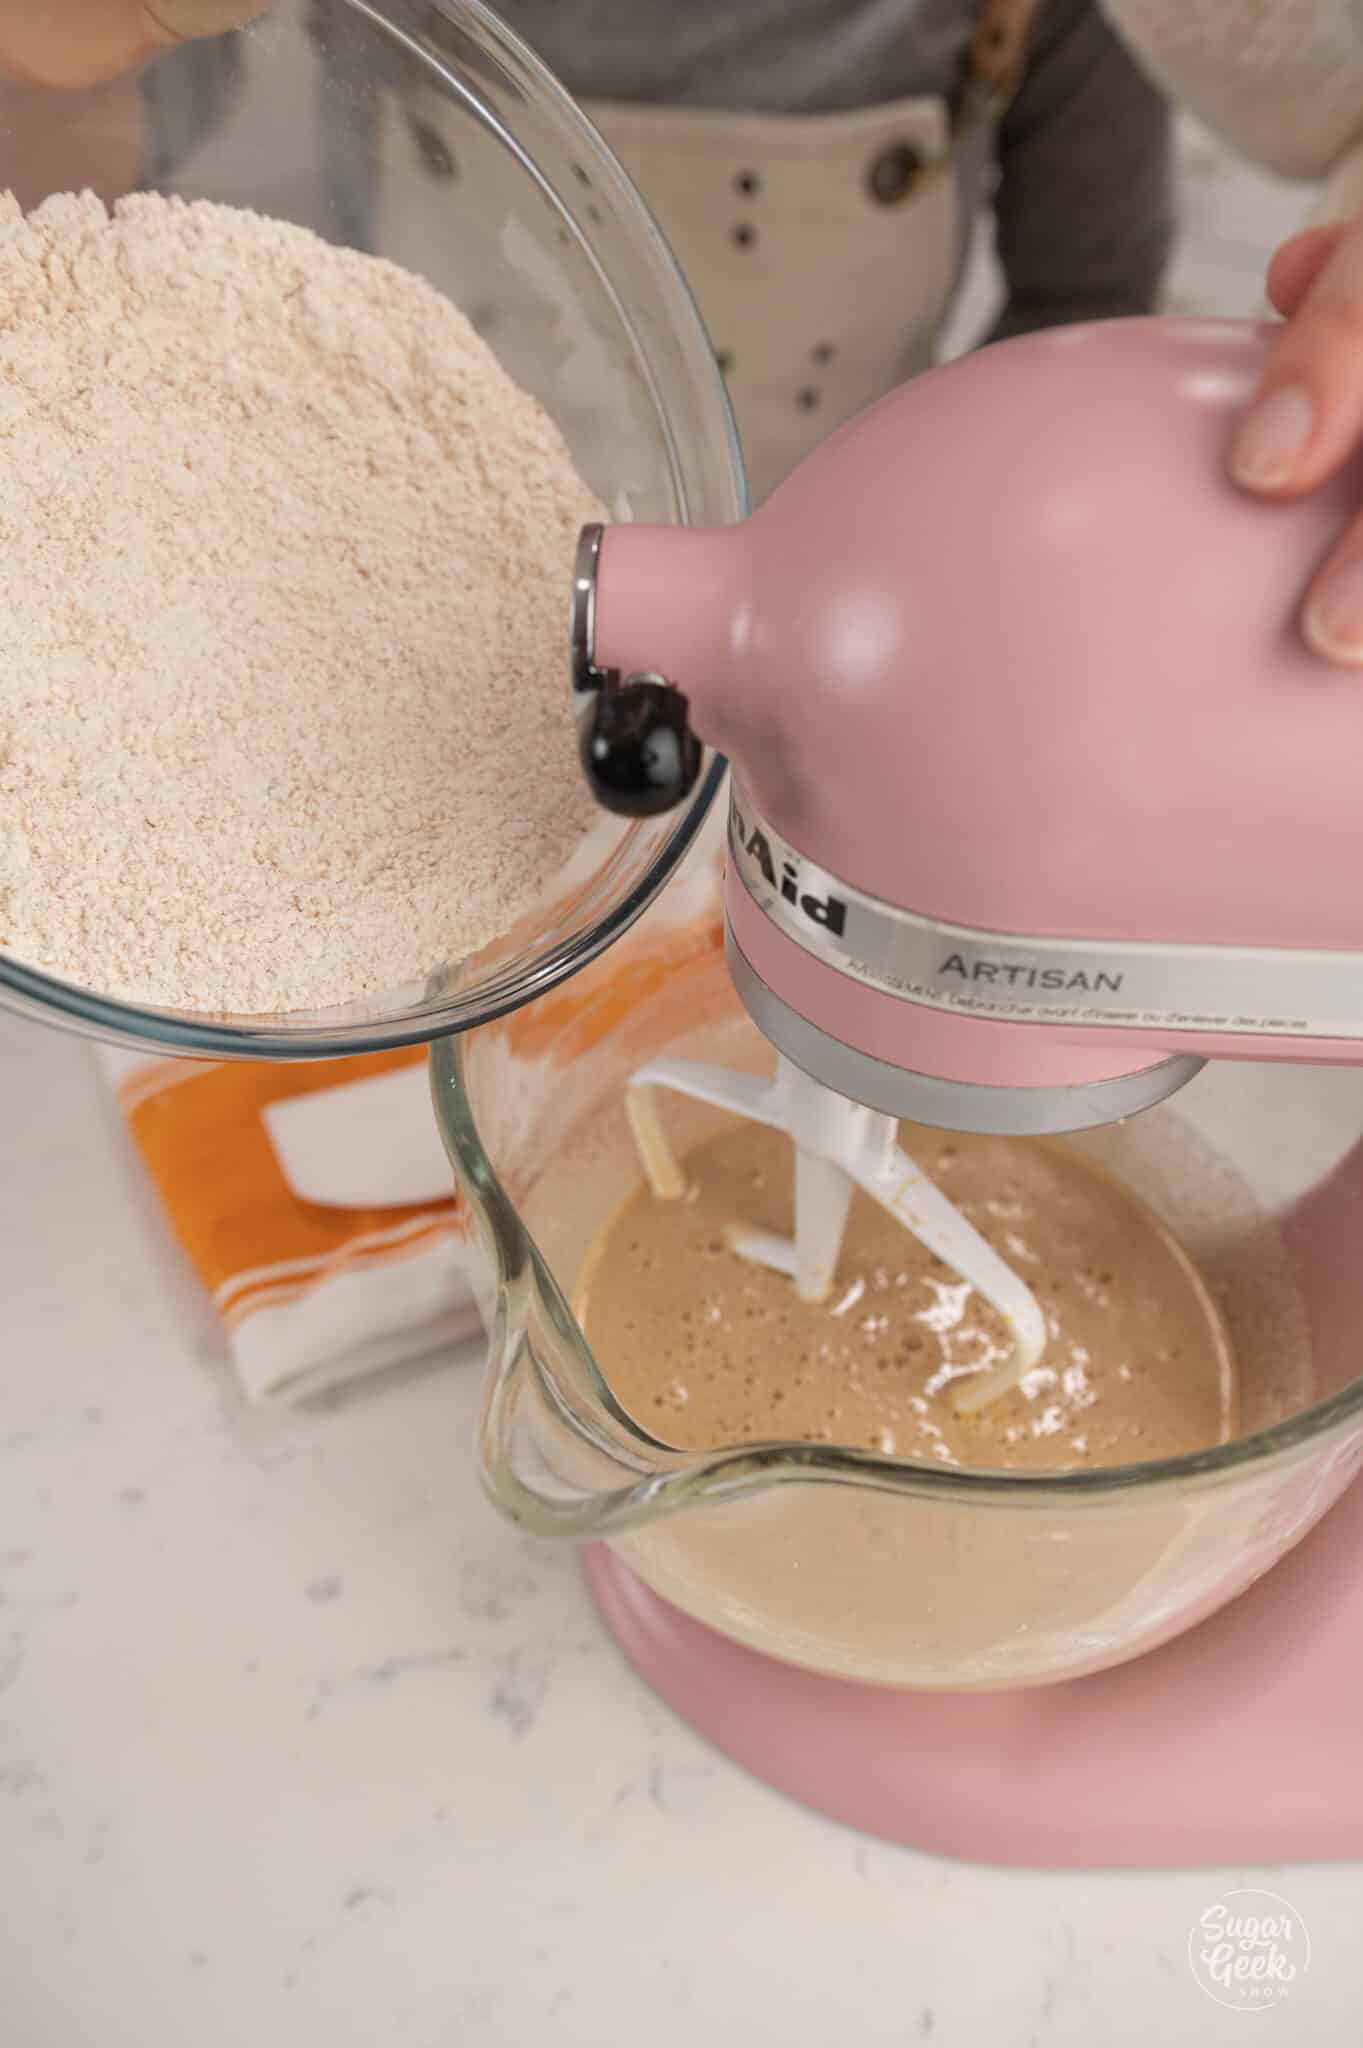 Hand adding a bowl of flour to a stand mixer bowl